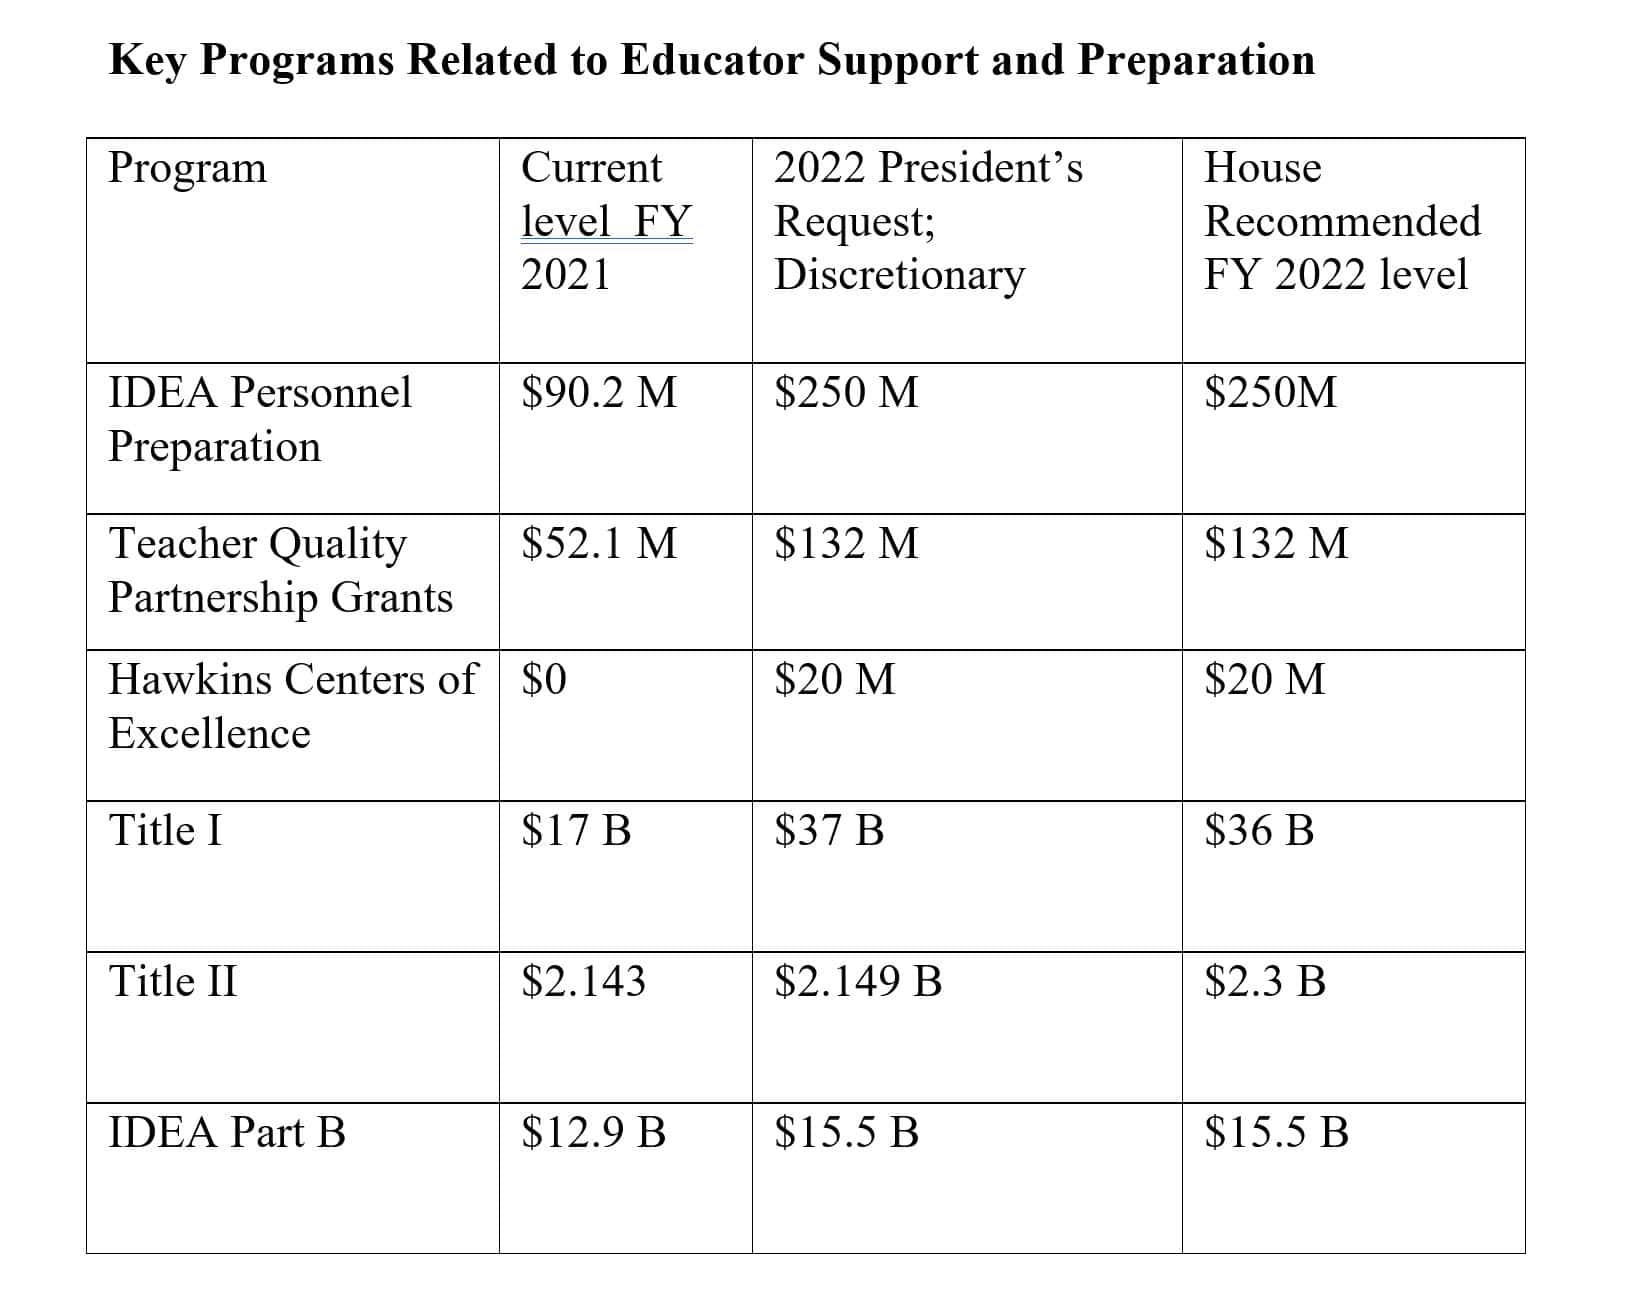 Key Programs Related to Educator Support and Preparation